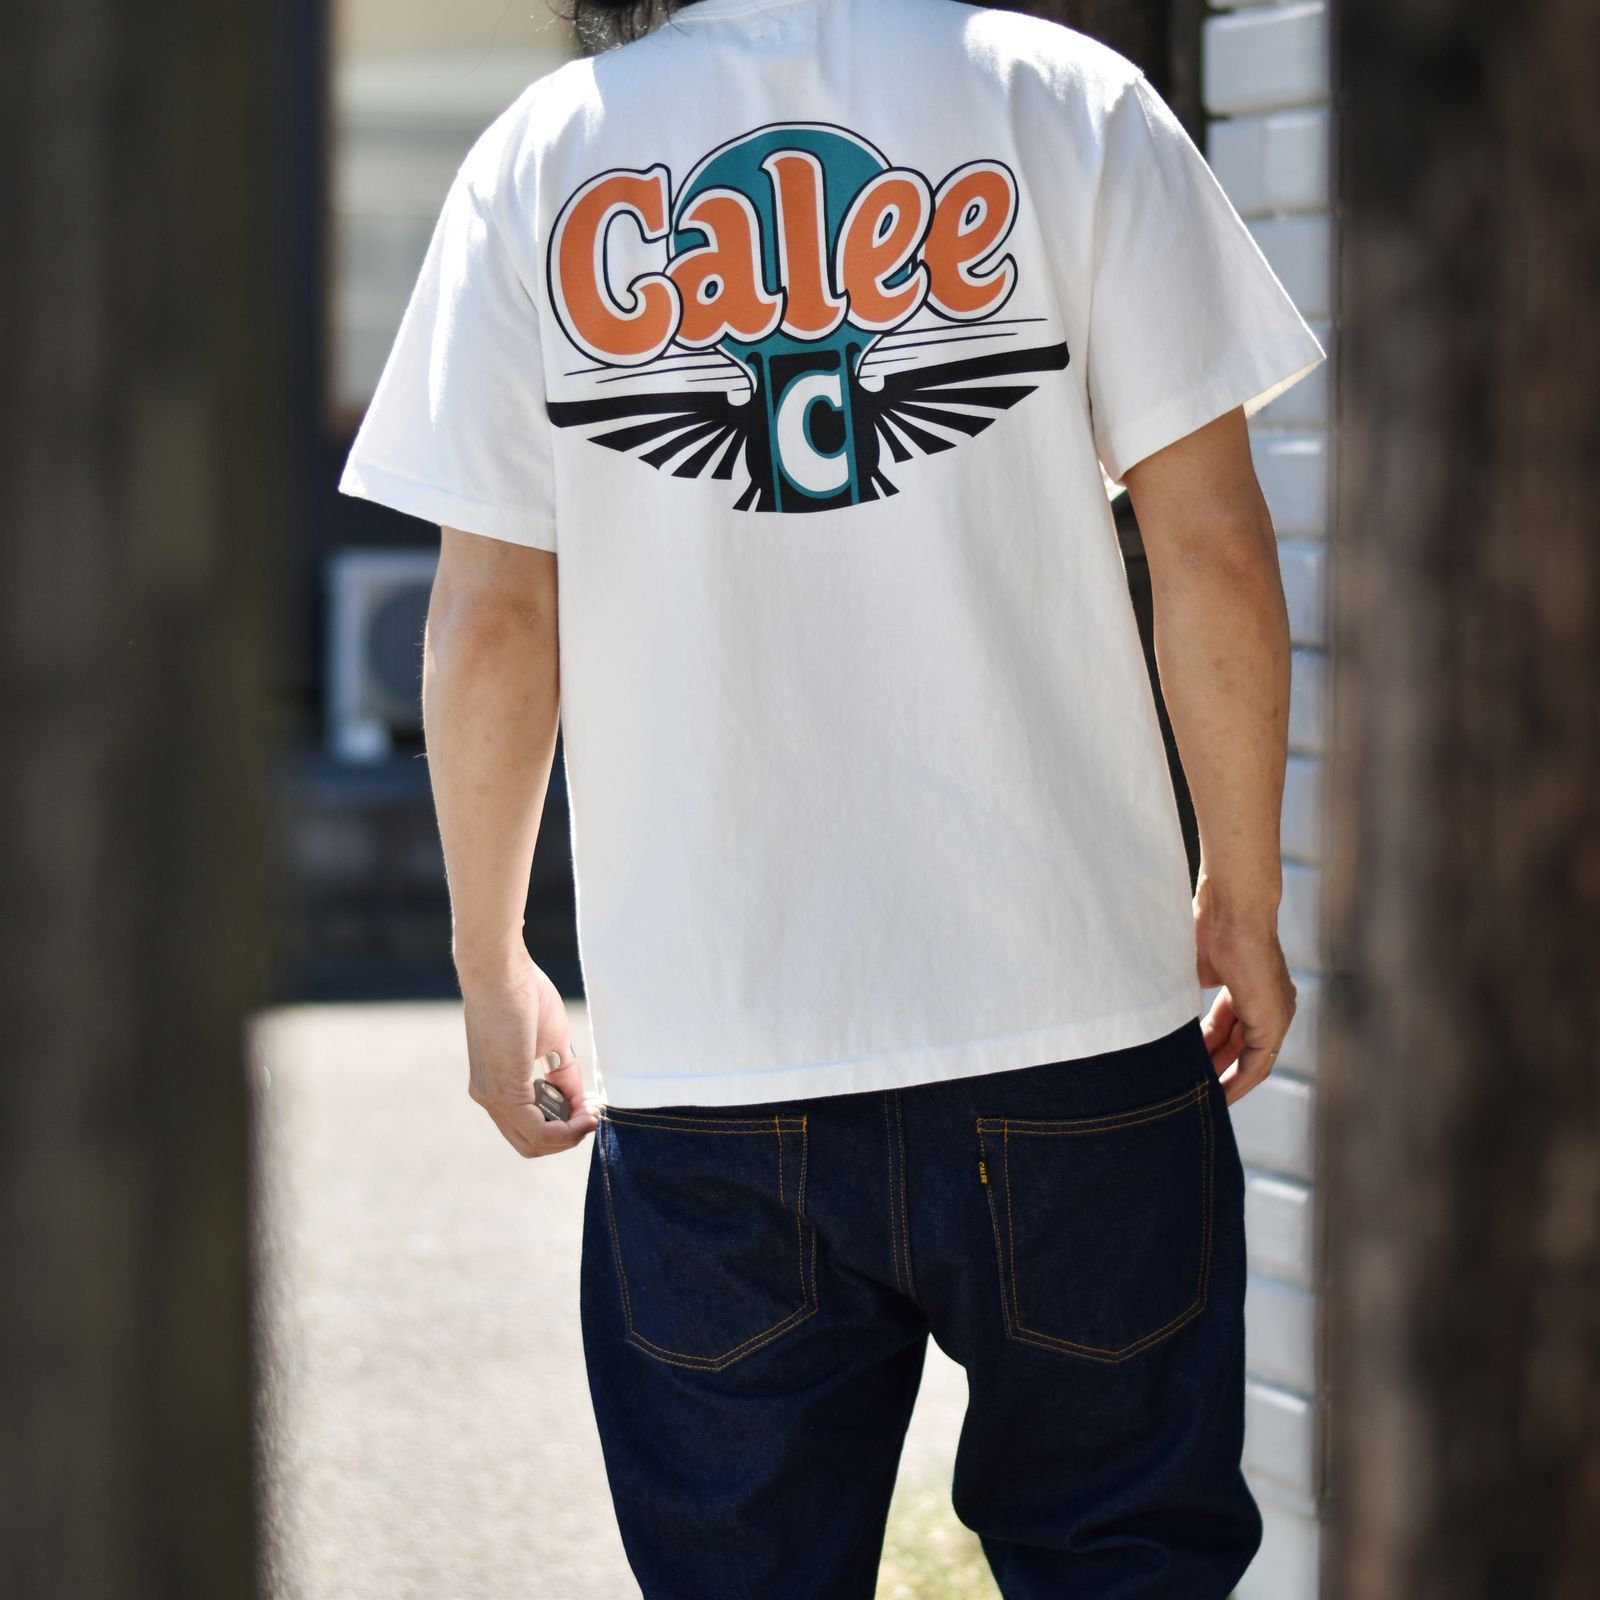 CALEE - キャリー | 22SS | プリントTシャツ | 着用イメージ♪ | chord ...